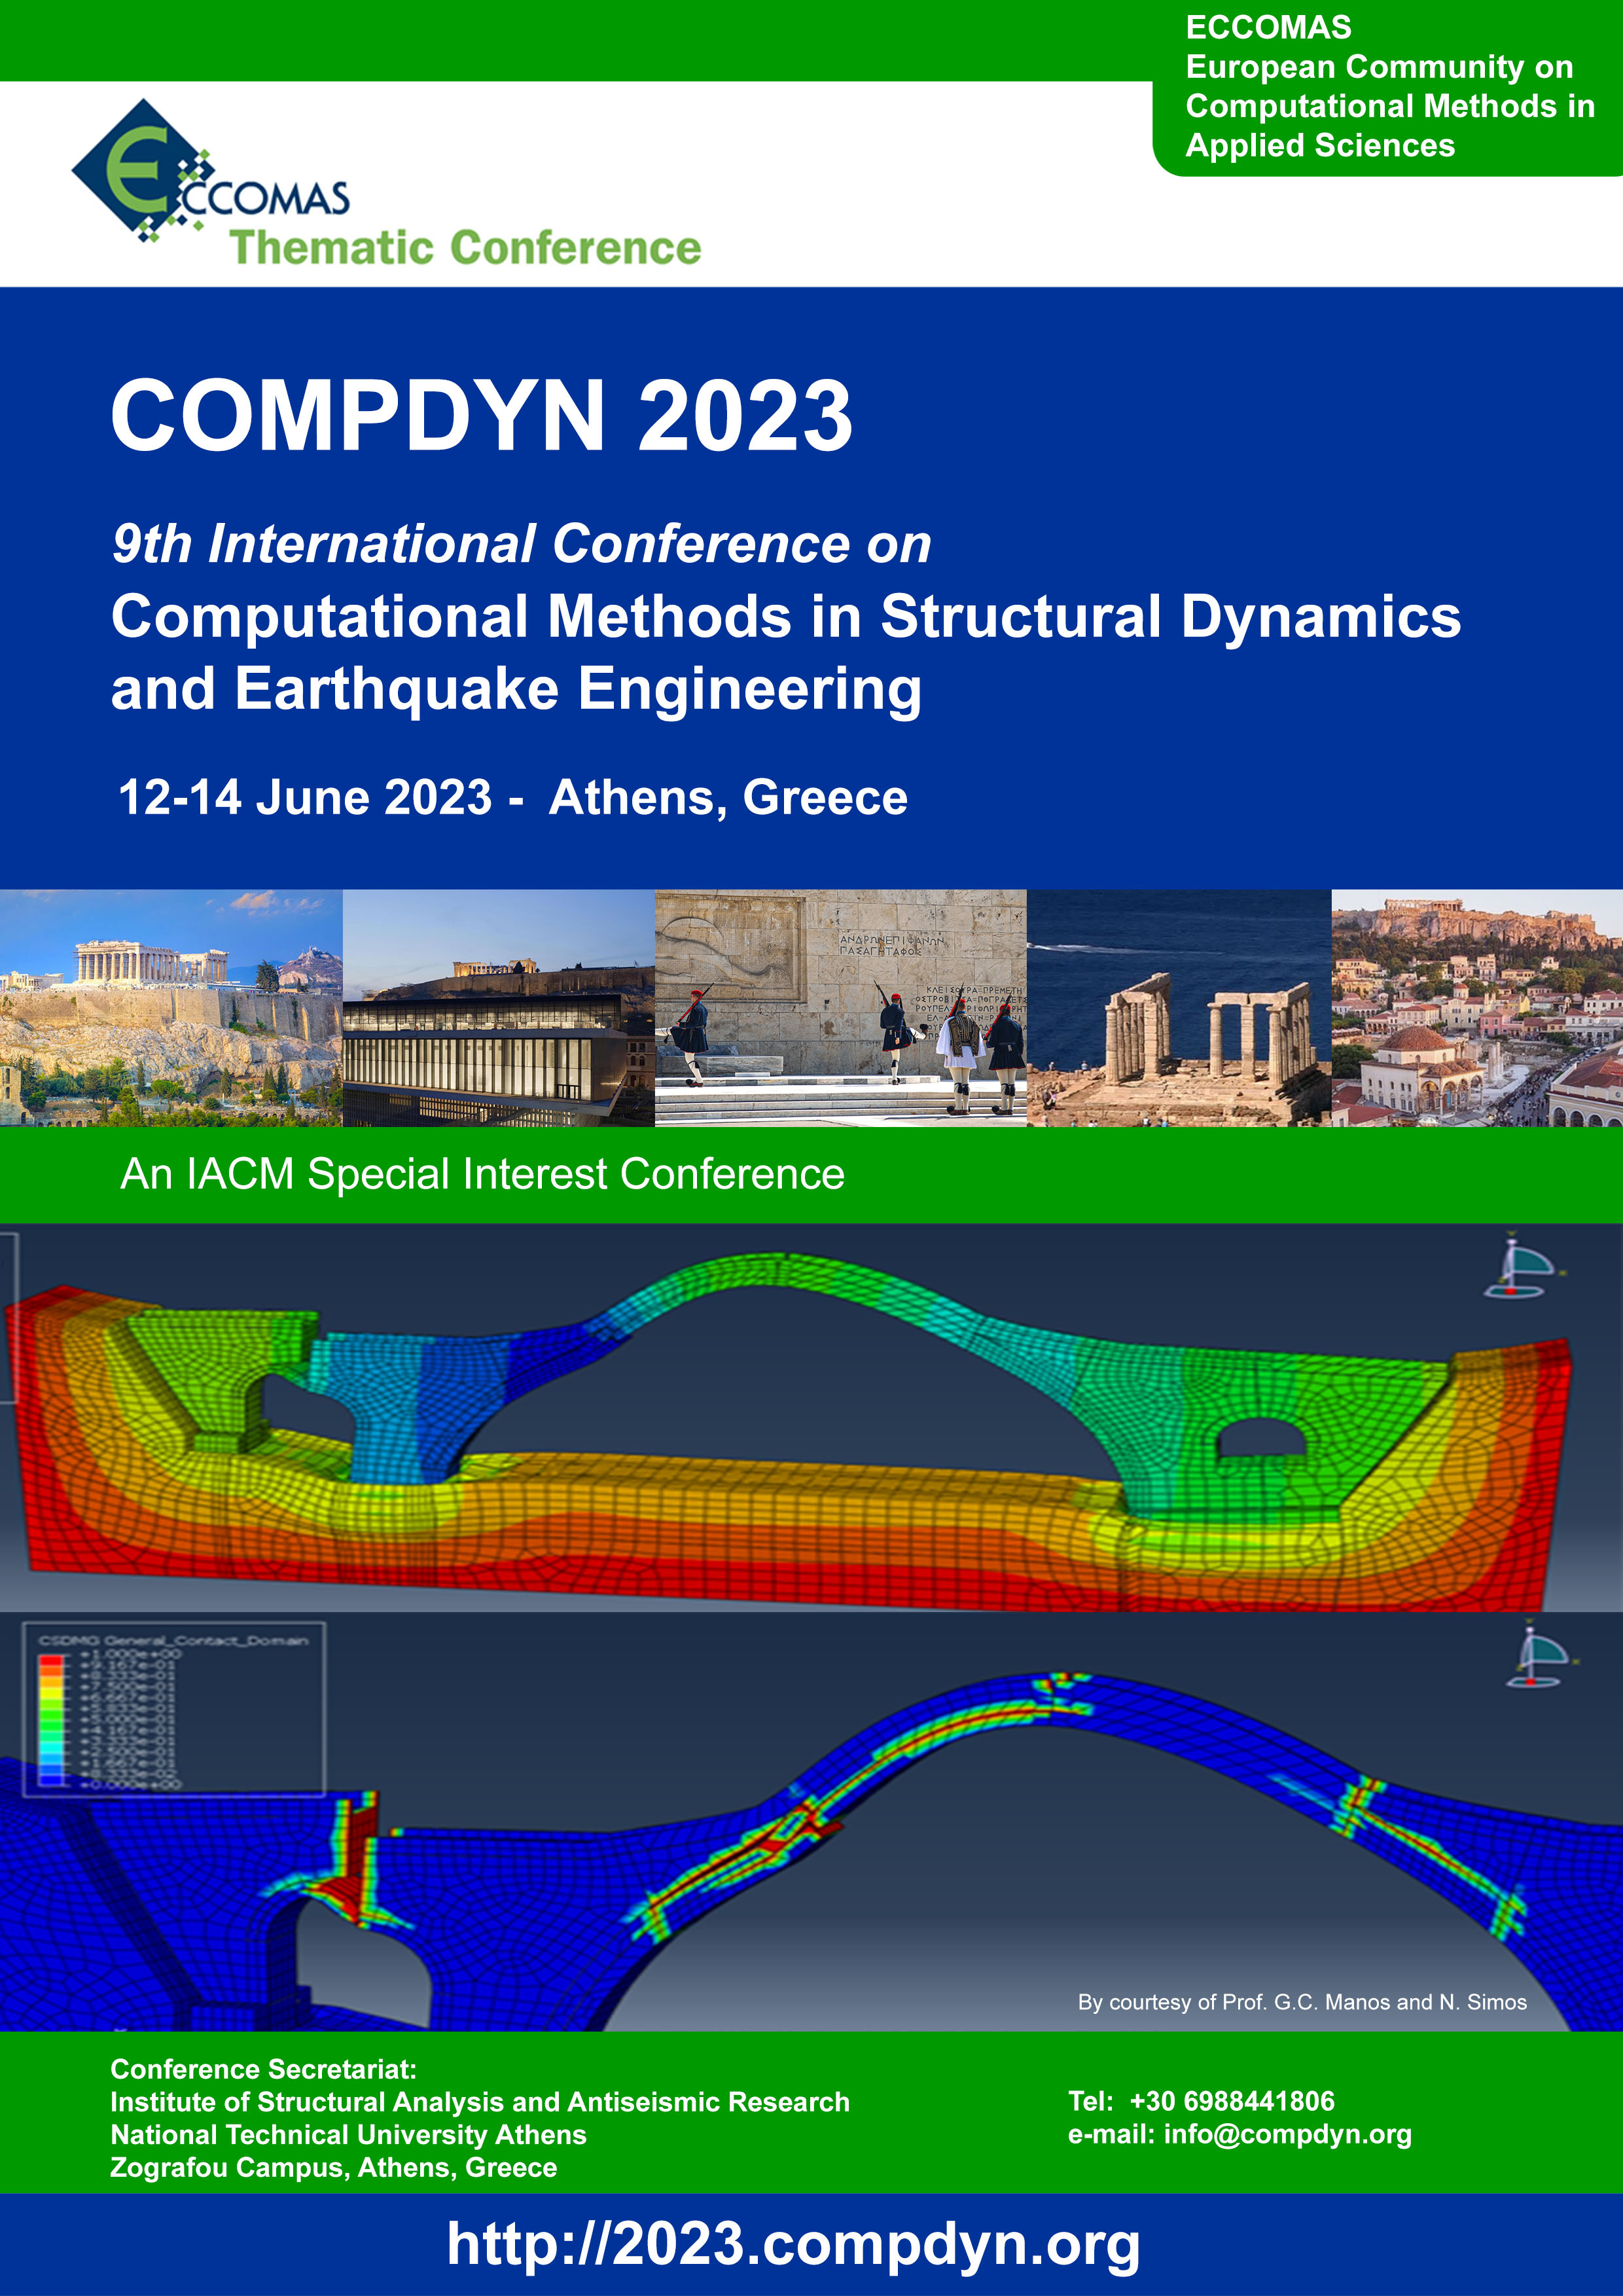 9th International Conference on Computational Methods in Structural Dynamics and Earthquake Engineering (COMPDYN 2023))